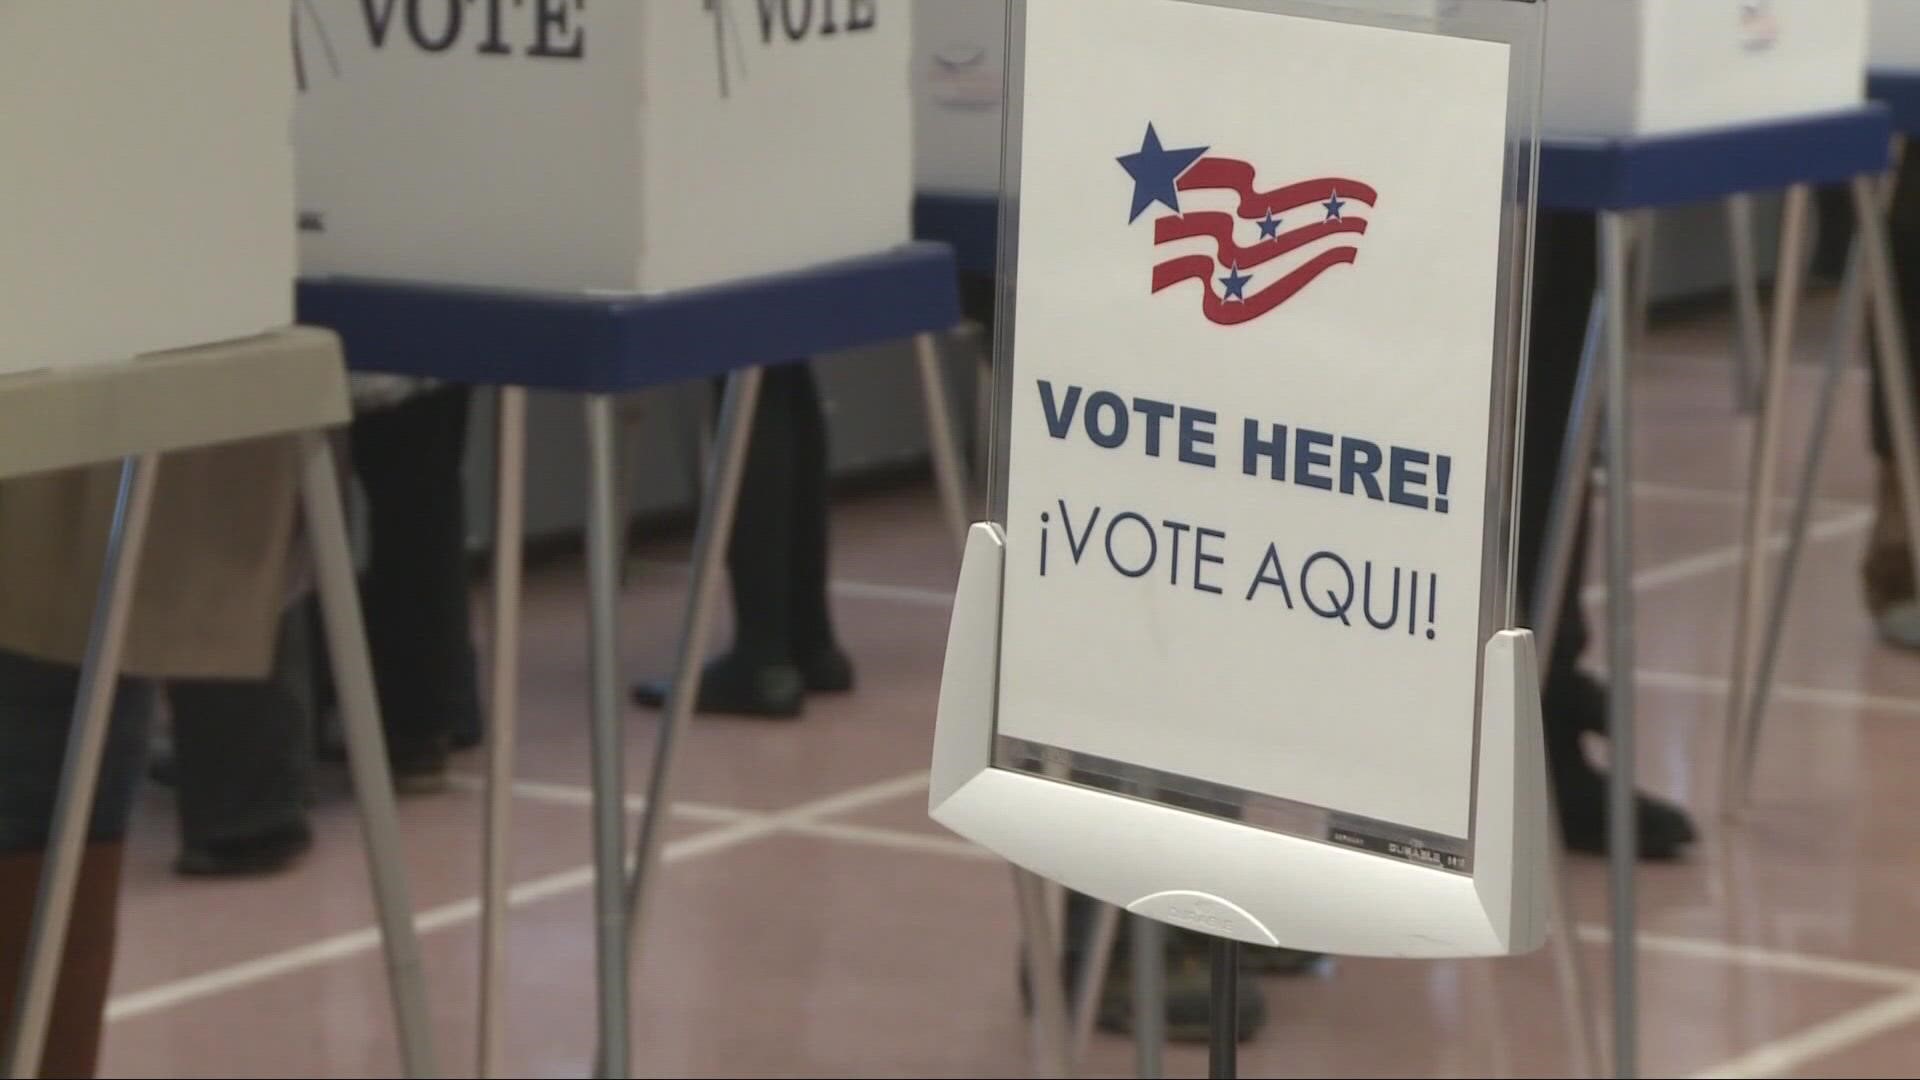 Ohio voters are hitting the polls for the August 2 special / primary election. 3News' Carmen Blackwell explains what's on the ballot.